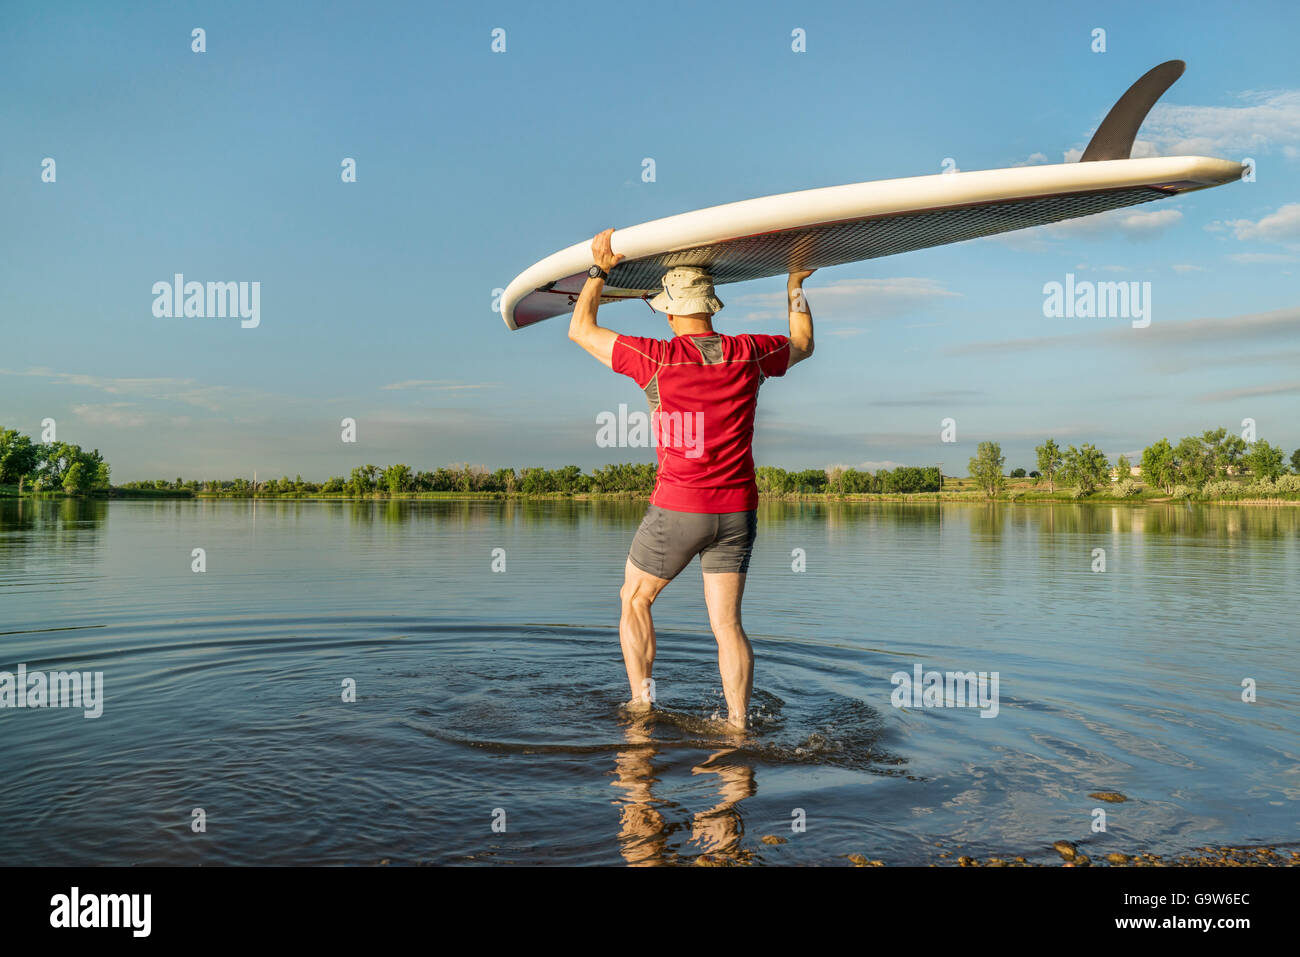 launching stand up paddleboard on a calm  lake in northern Colorado with an early summer scenery Stock Photo